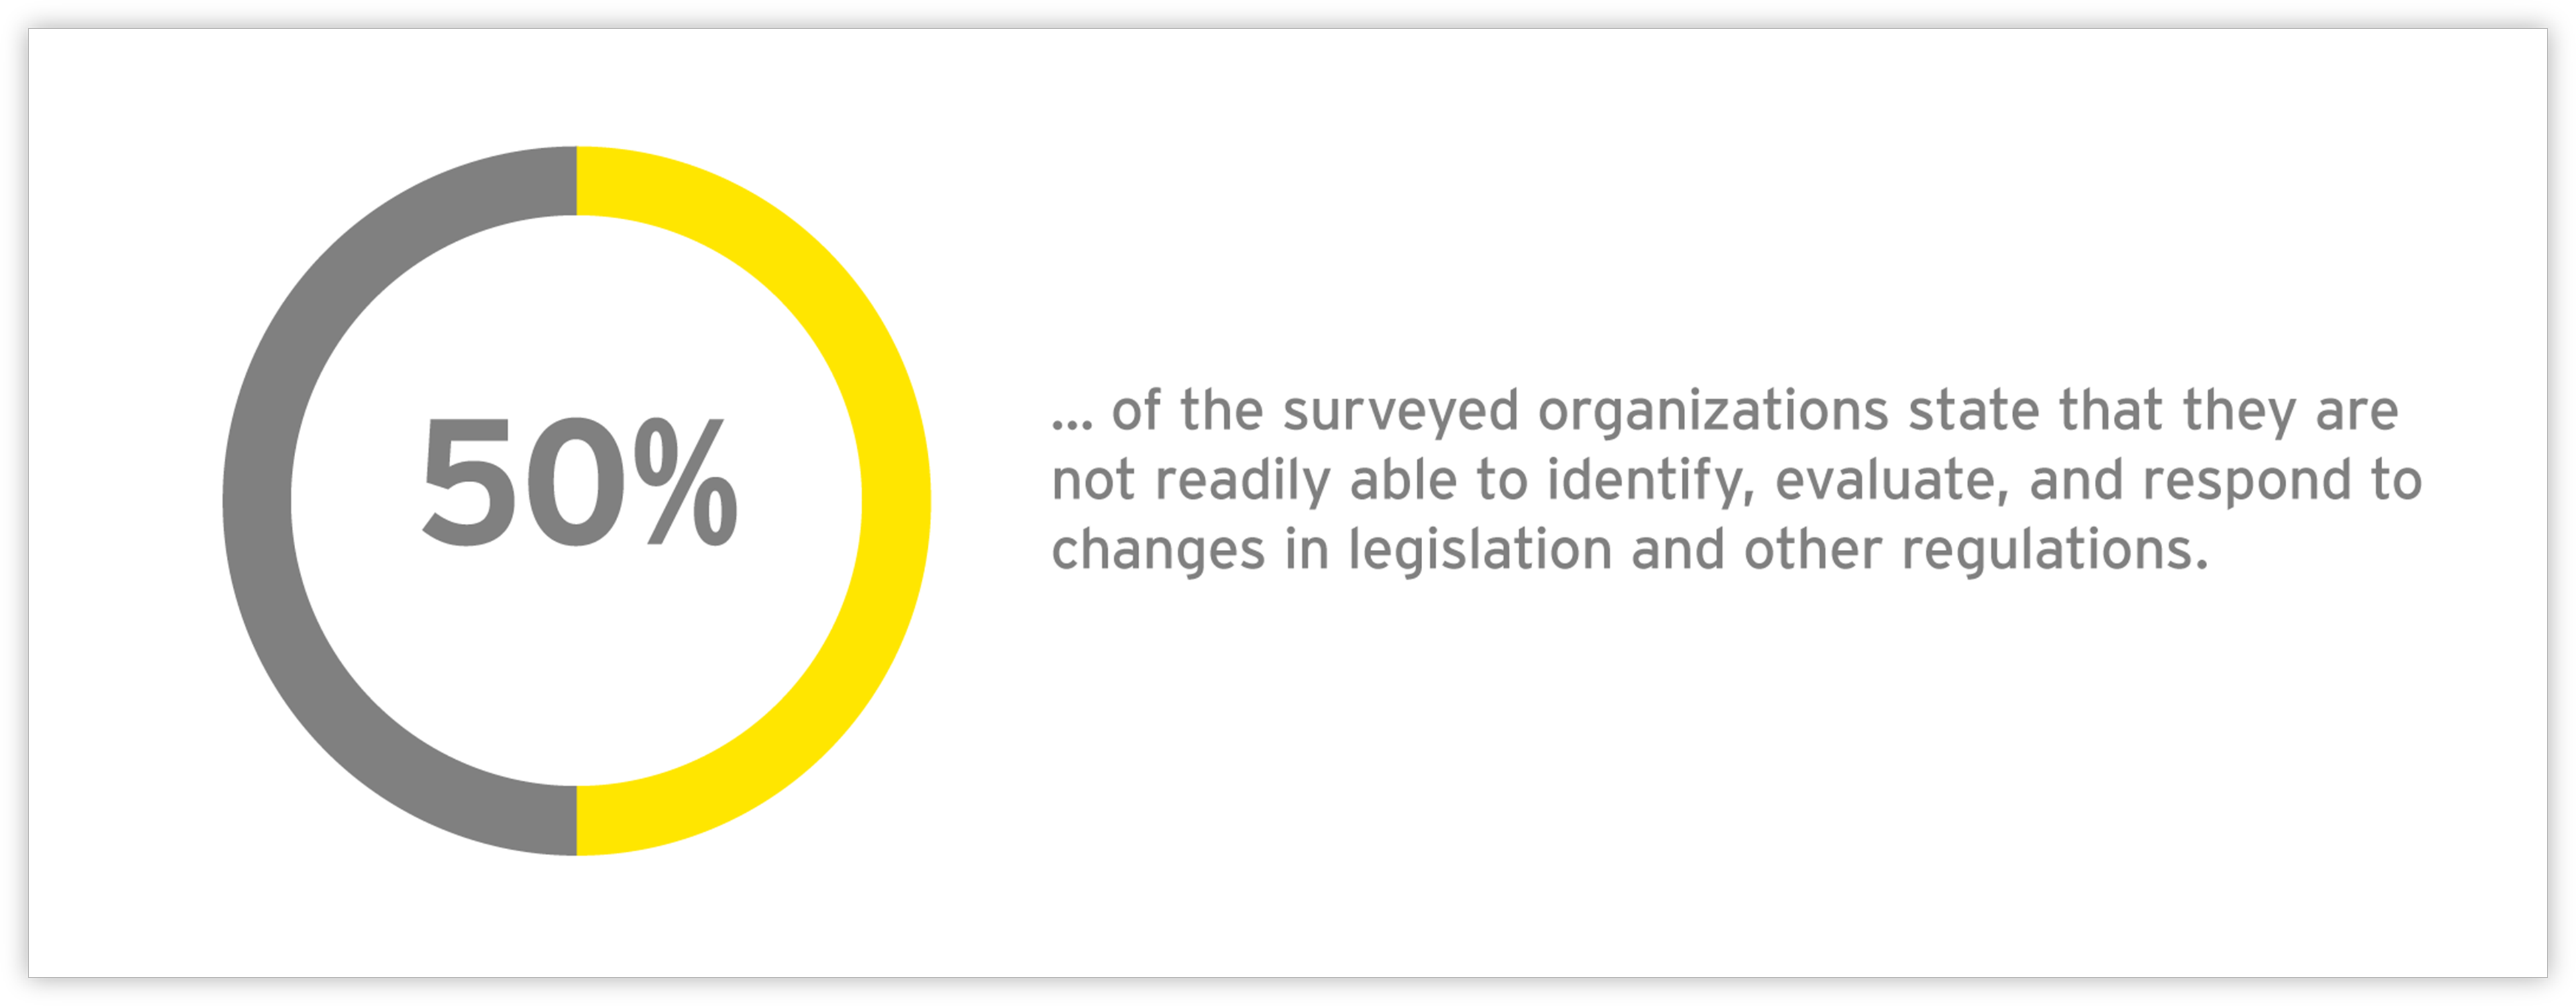 Graph: 50% of the surveyed organizations state that they are not readily able to identify, evaluate, and respond to changes in legislation and other regulations.